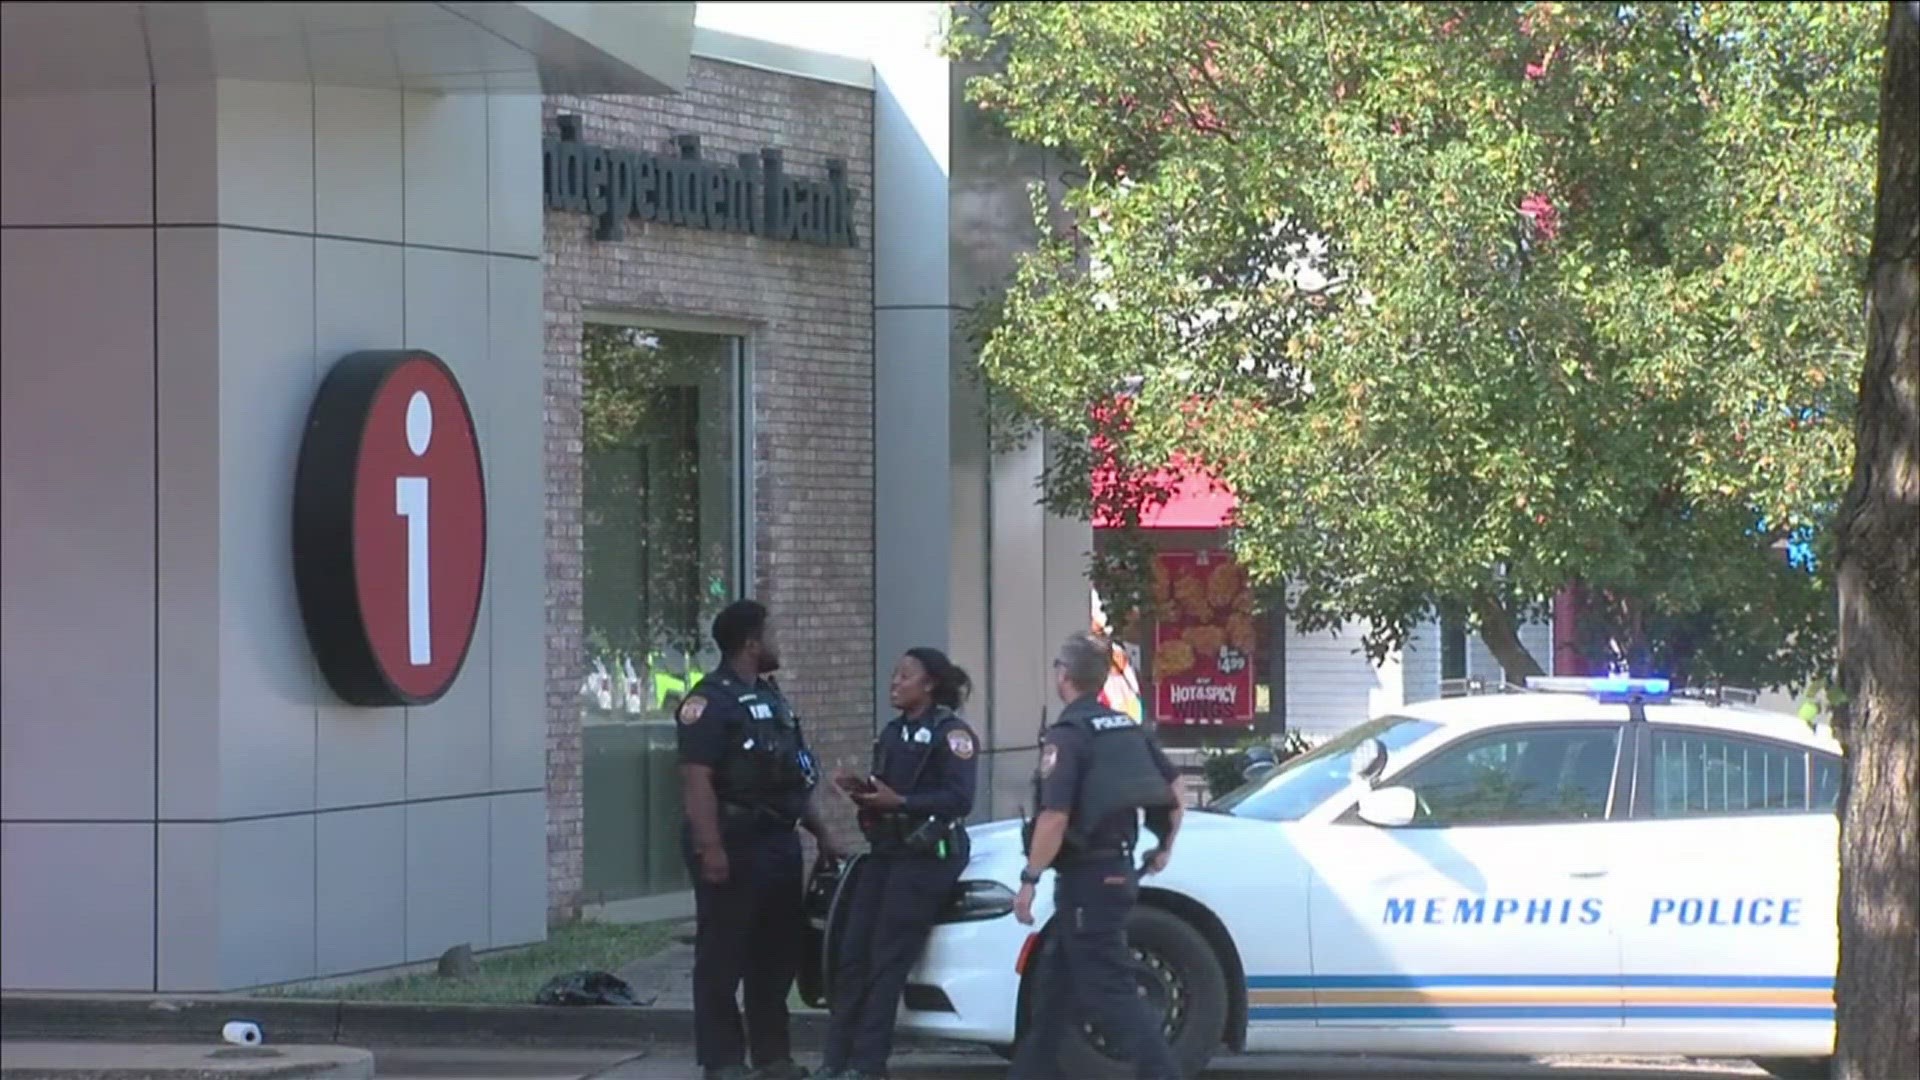 Memphis Police responded to the robbery Thursday around 10 a.m. at 1711 Union Avenue.